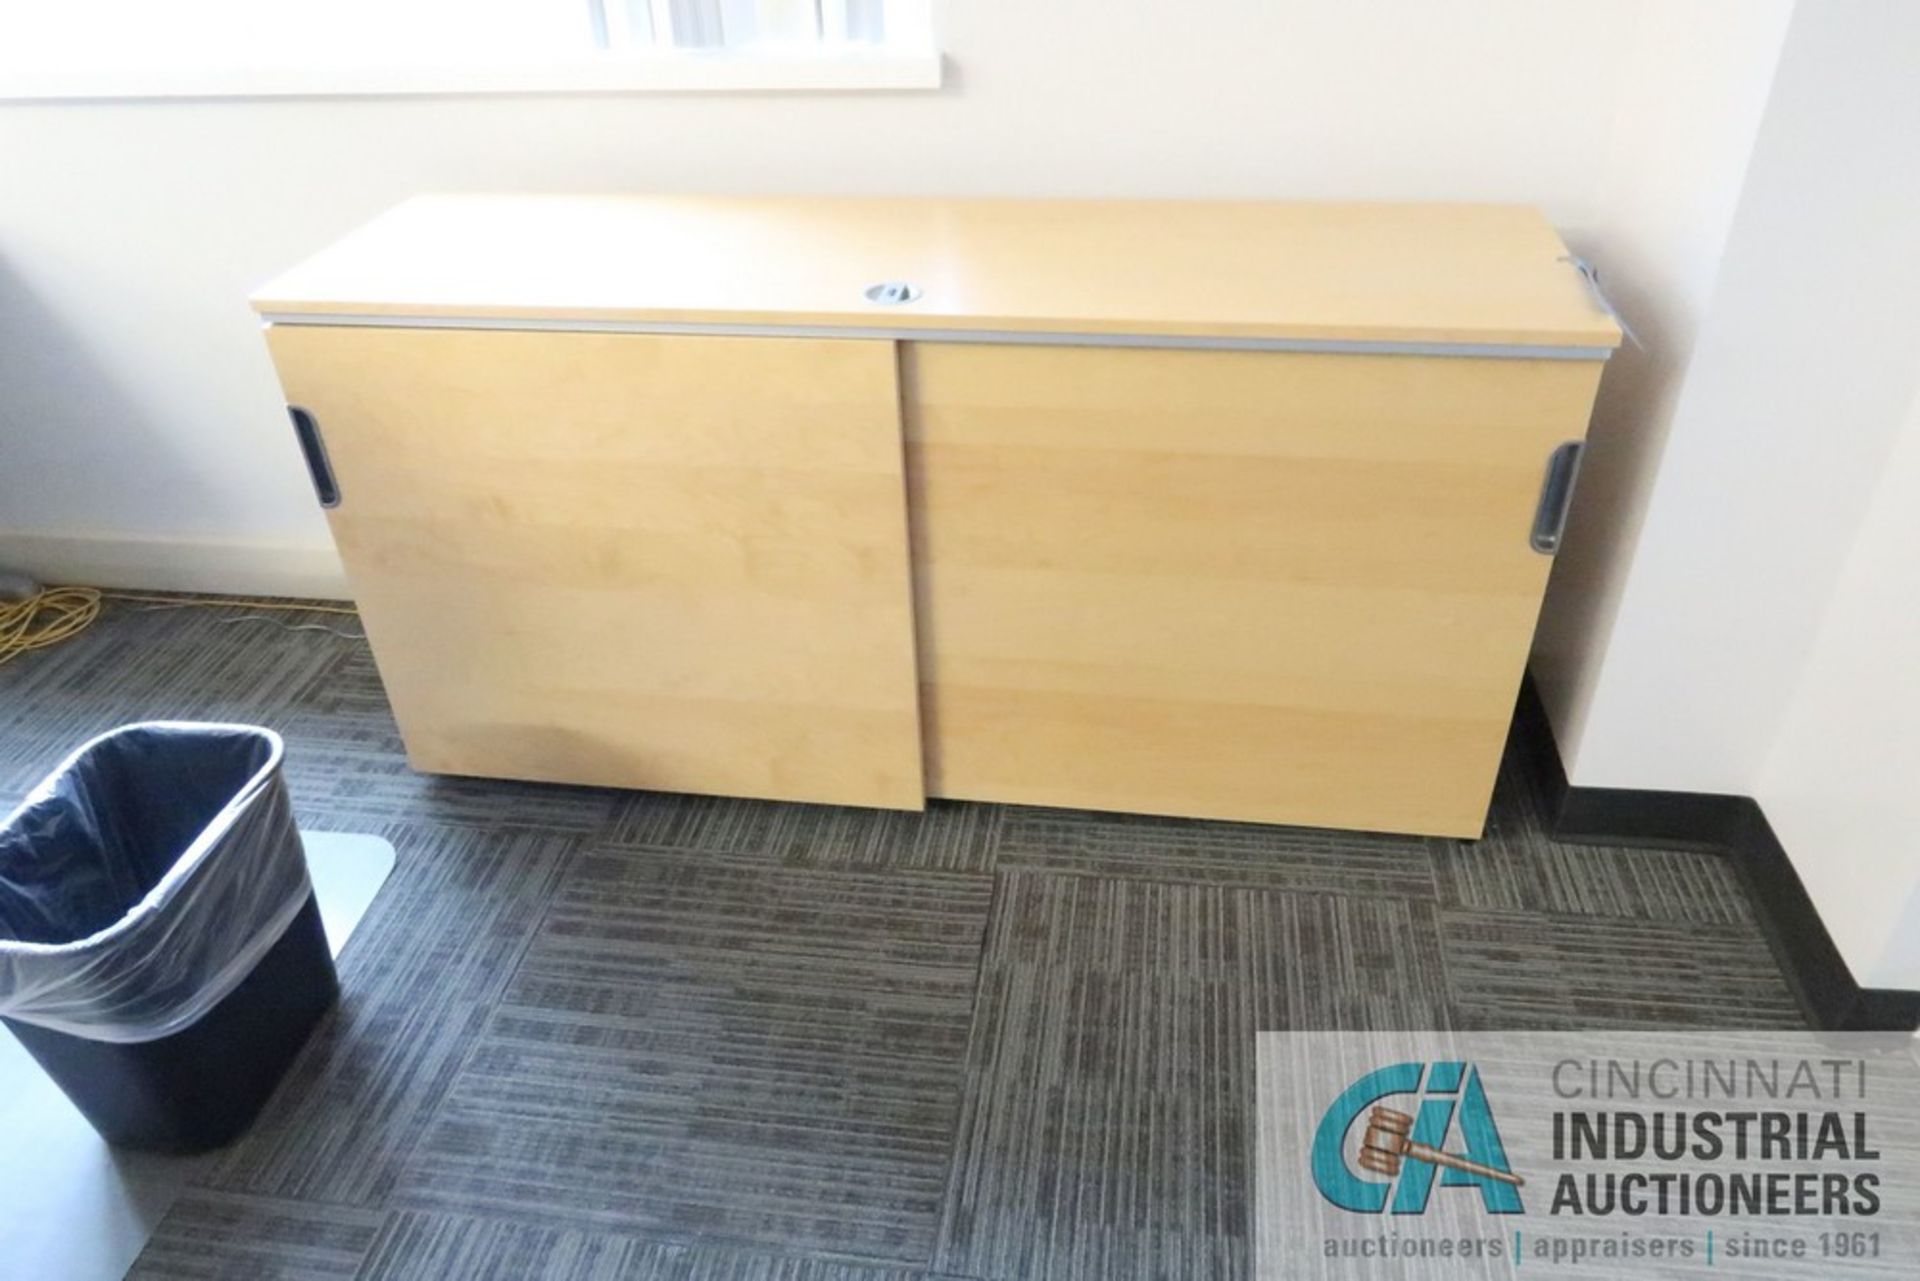 79" X 86" X 24" GALANT L-SHAPED DESK, (1) 3-DRAWER CABINET, (1) STORAGE CABINET, (1) EXECUTIVE - Image 5 of 5